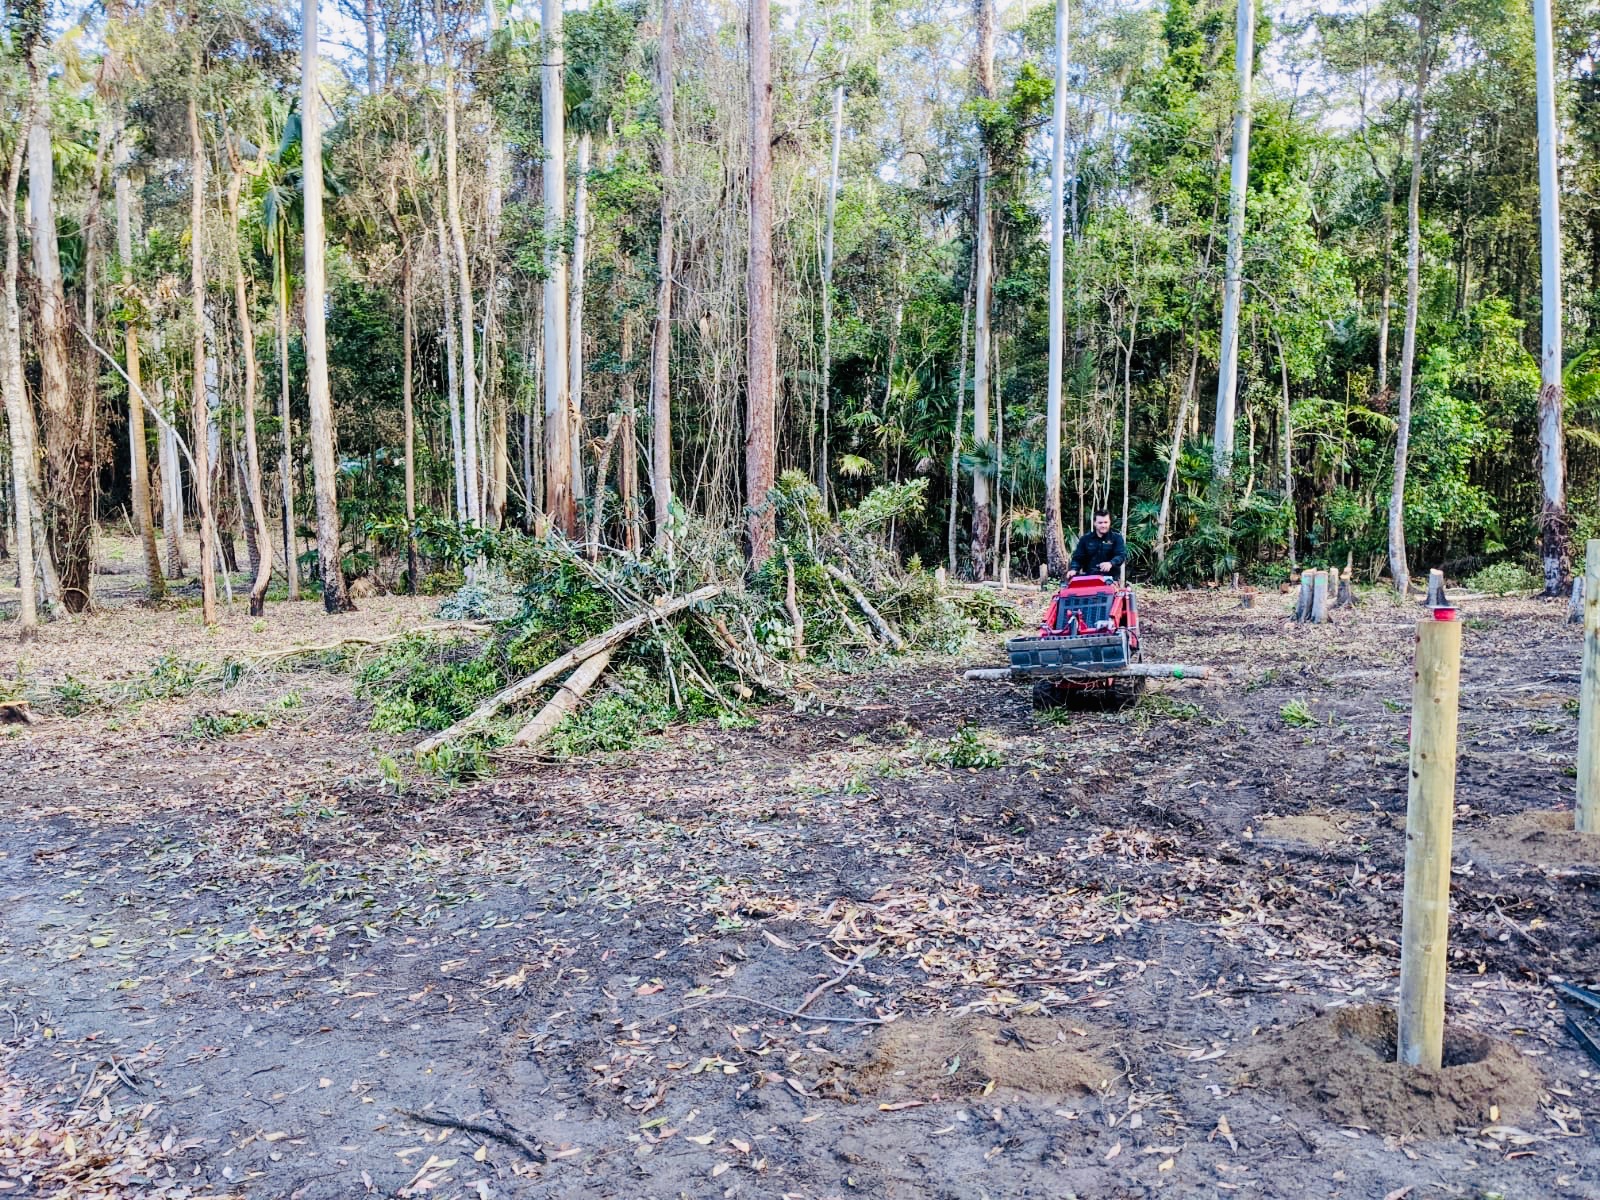 Land clearing